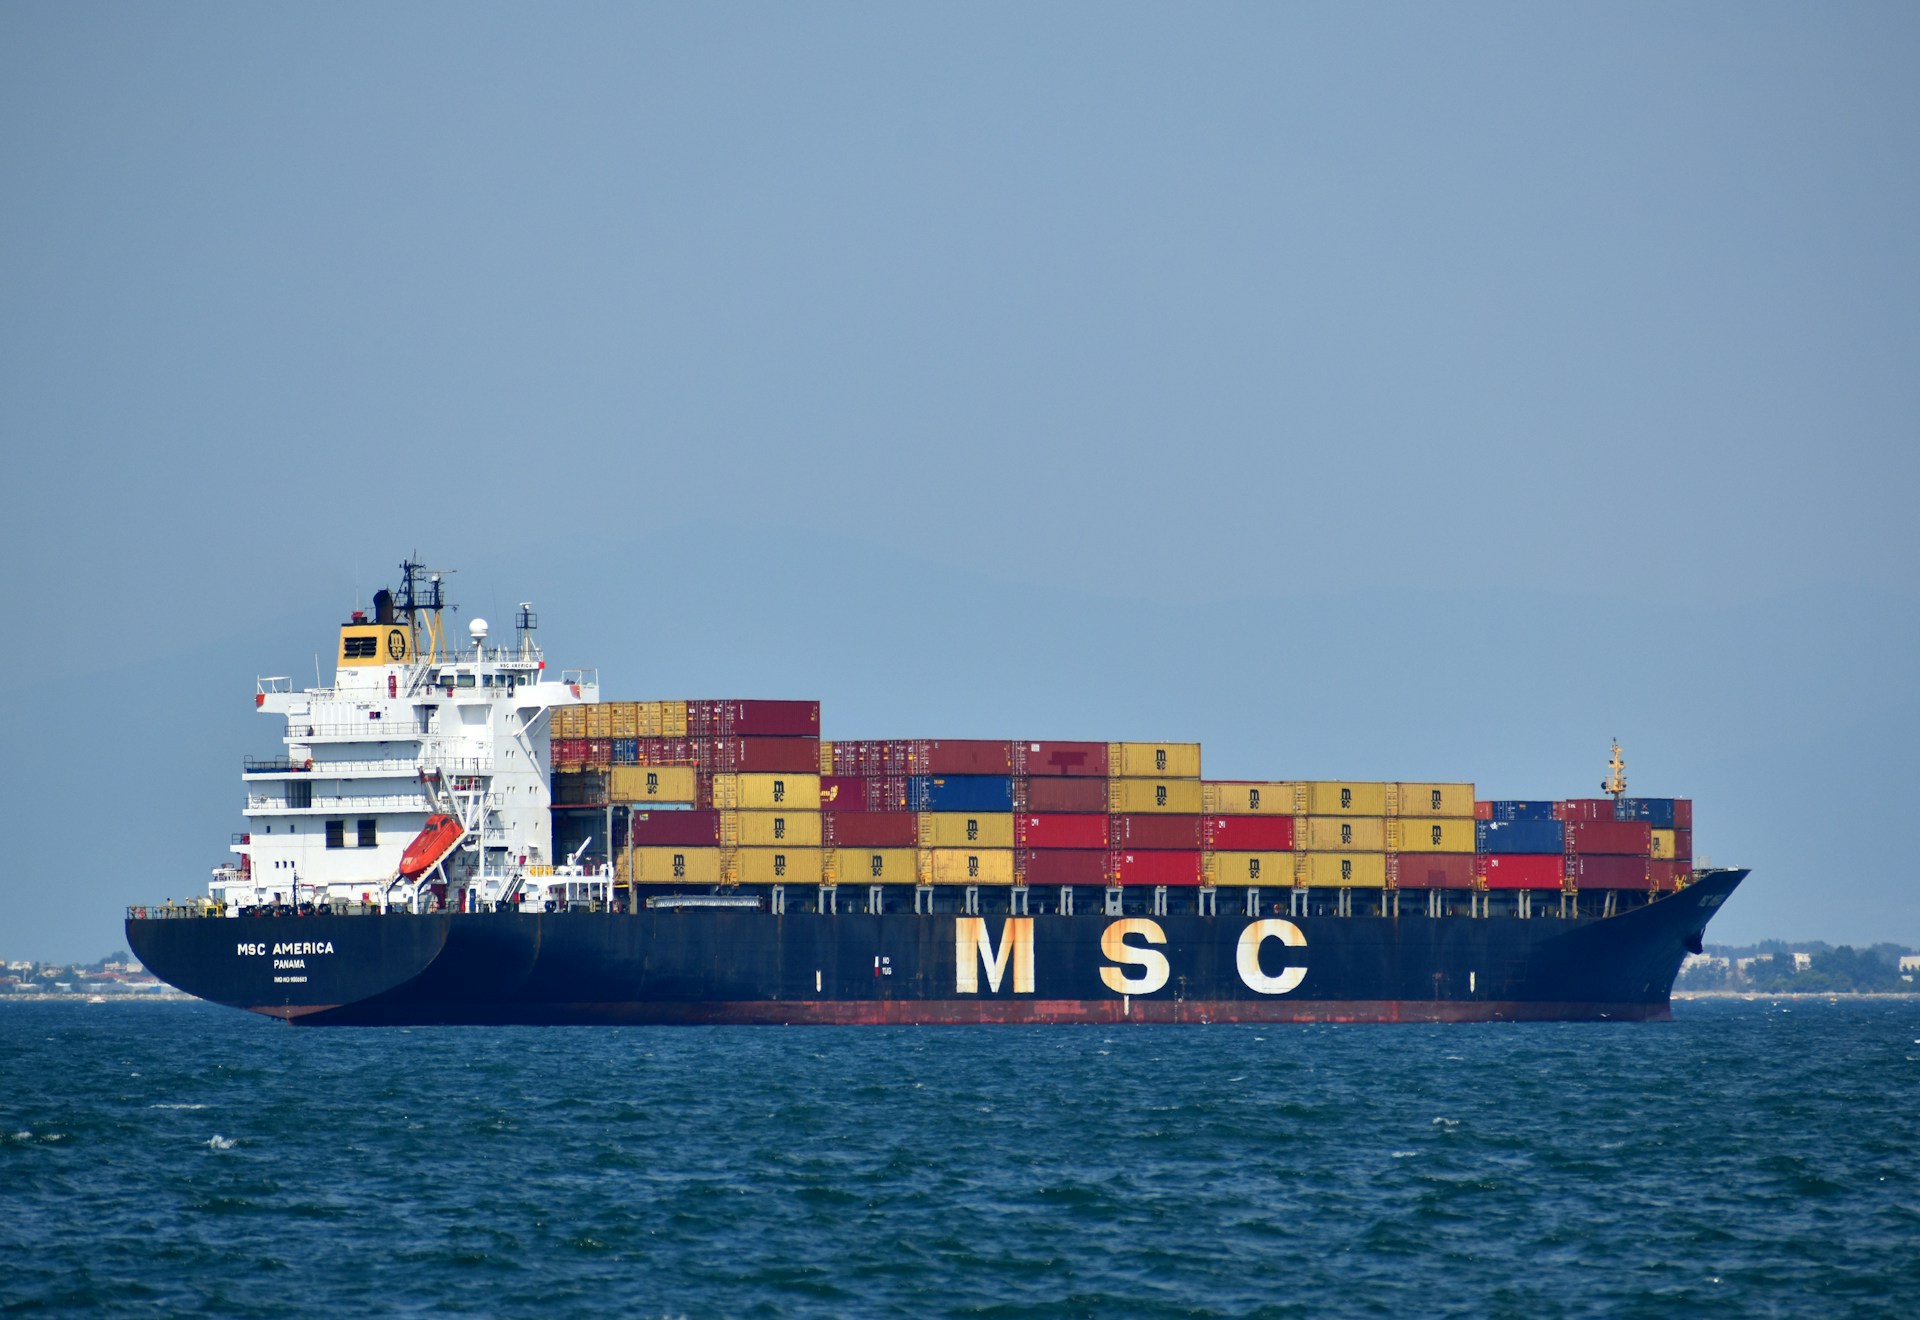 Houthis Claim Attack on MSC Container Ship